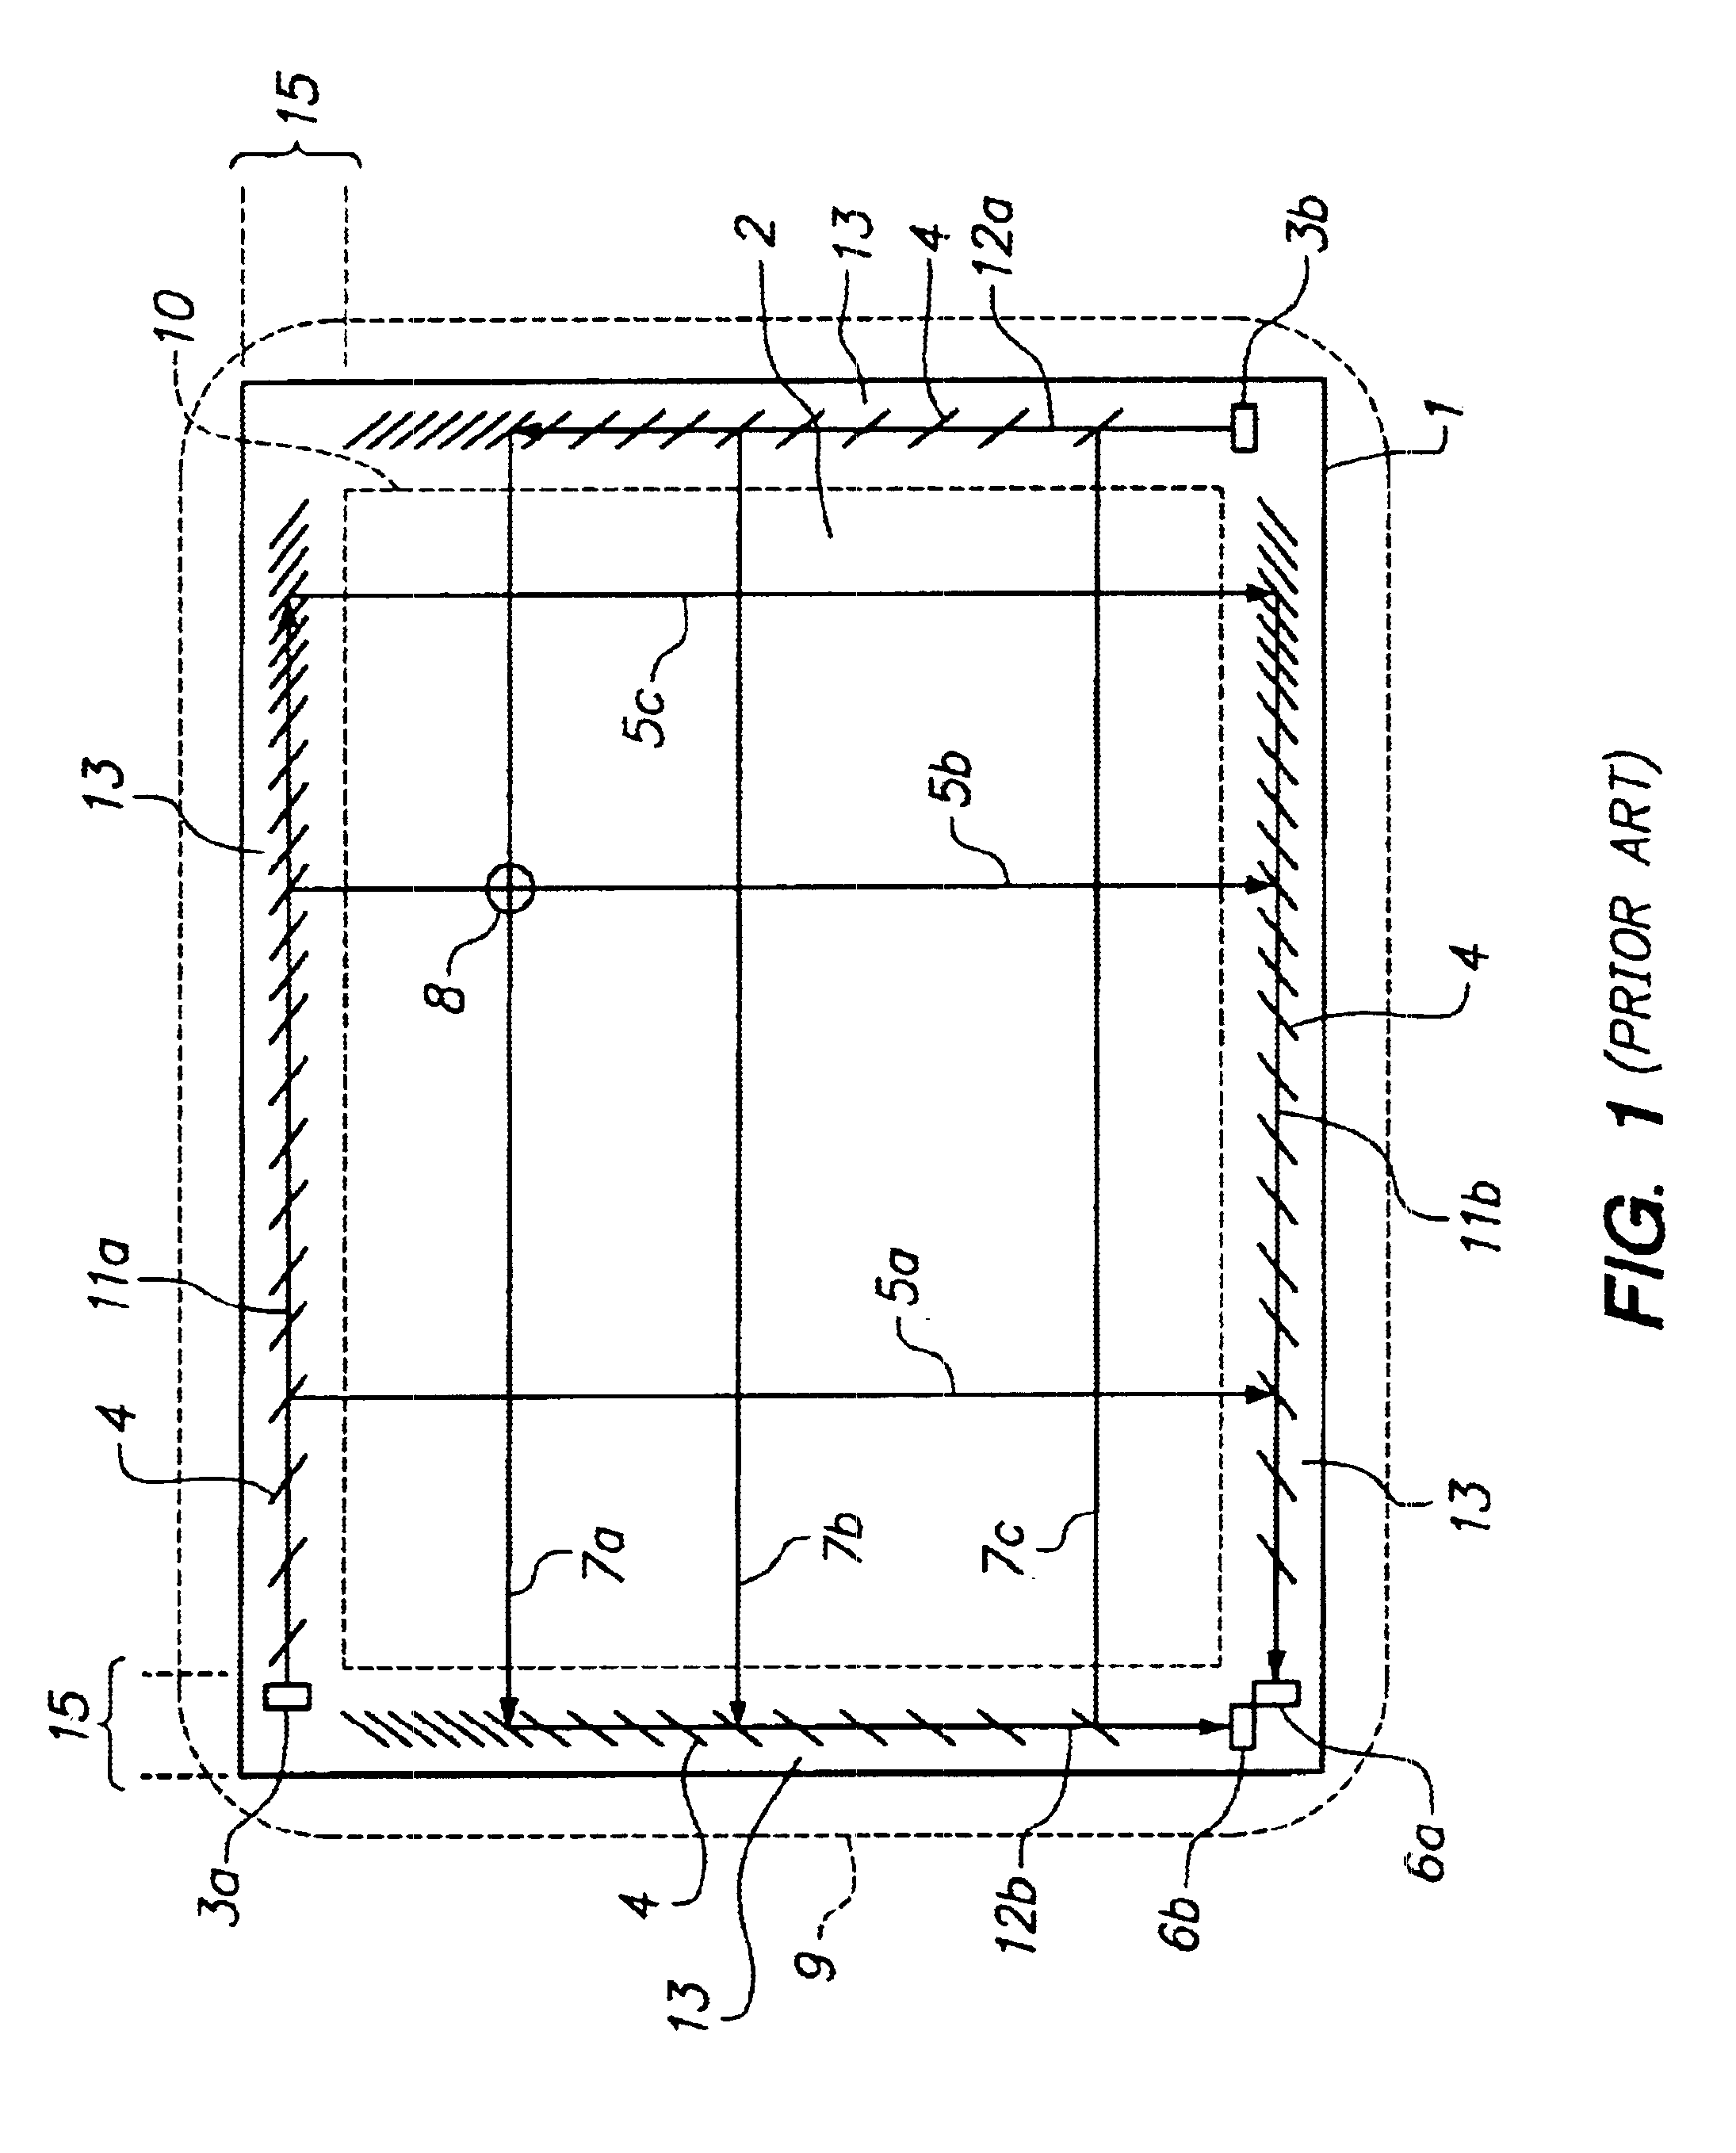 Acoustic touchscreen having waveguided reflector arrays